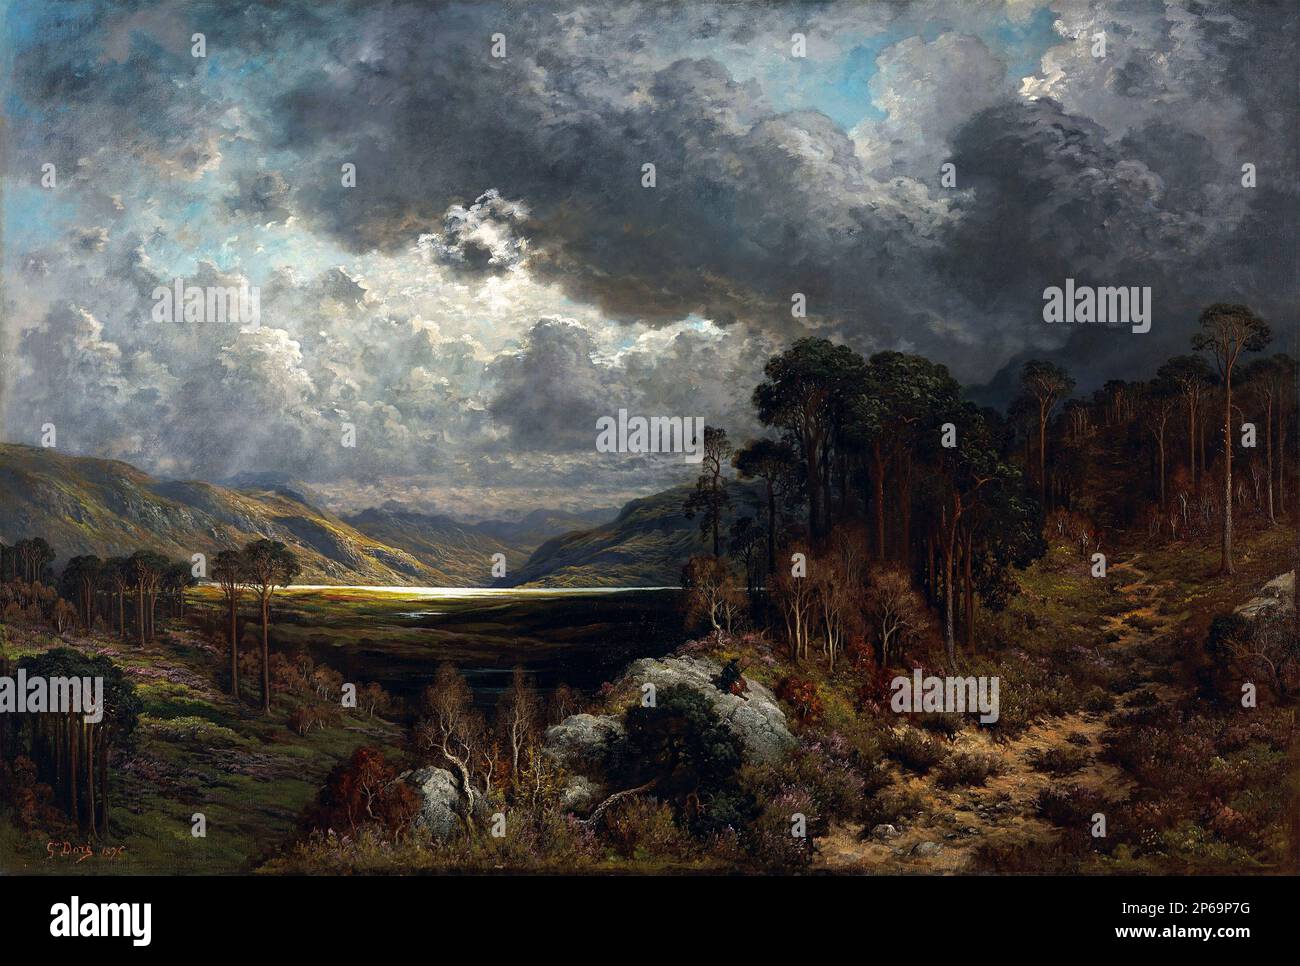 Souvenir of Loch Lomond by Gustave Dore (1832-1883), oil on canvas, 1875 Stock Photo